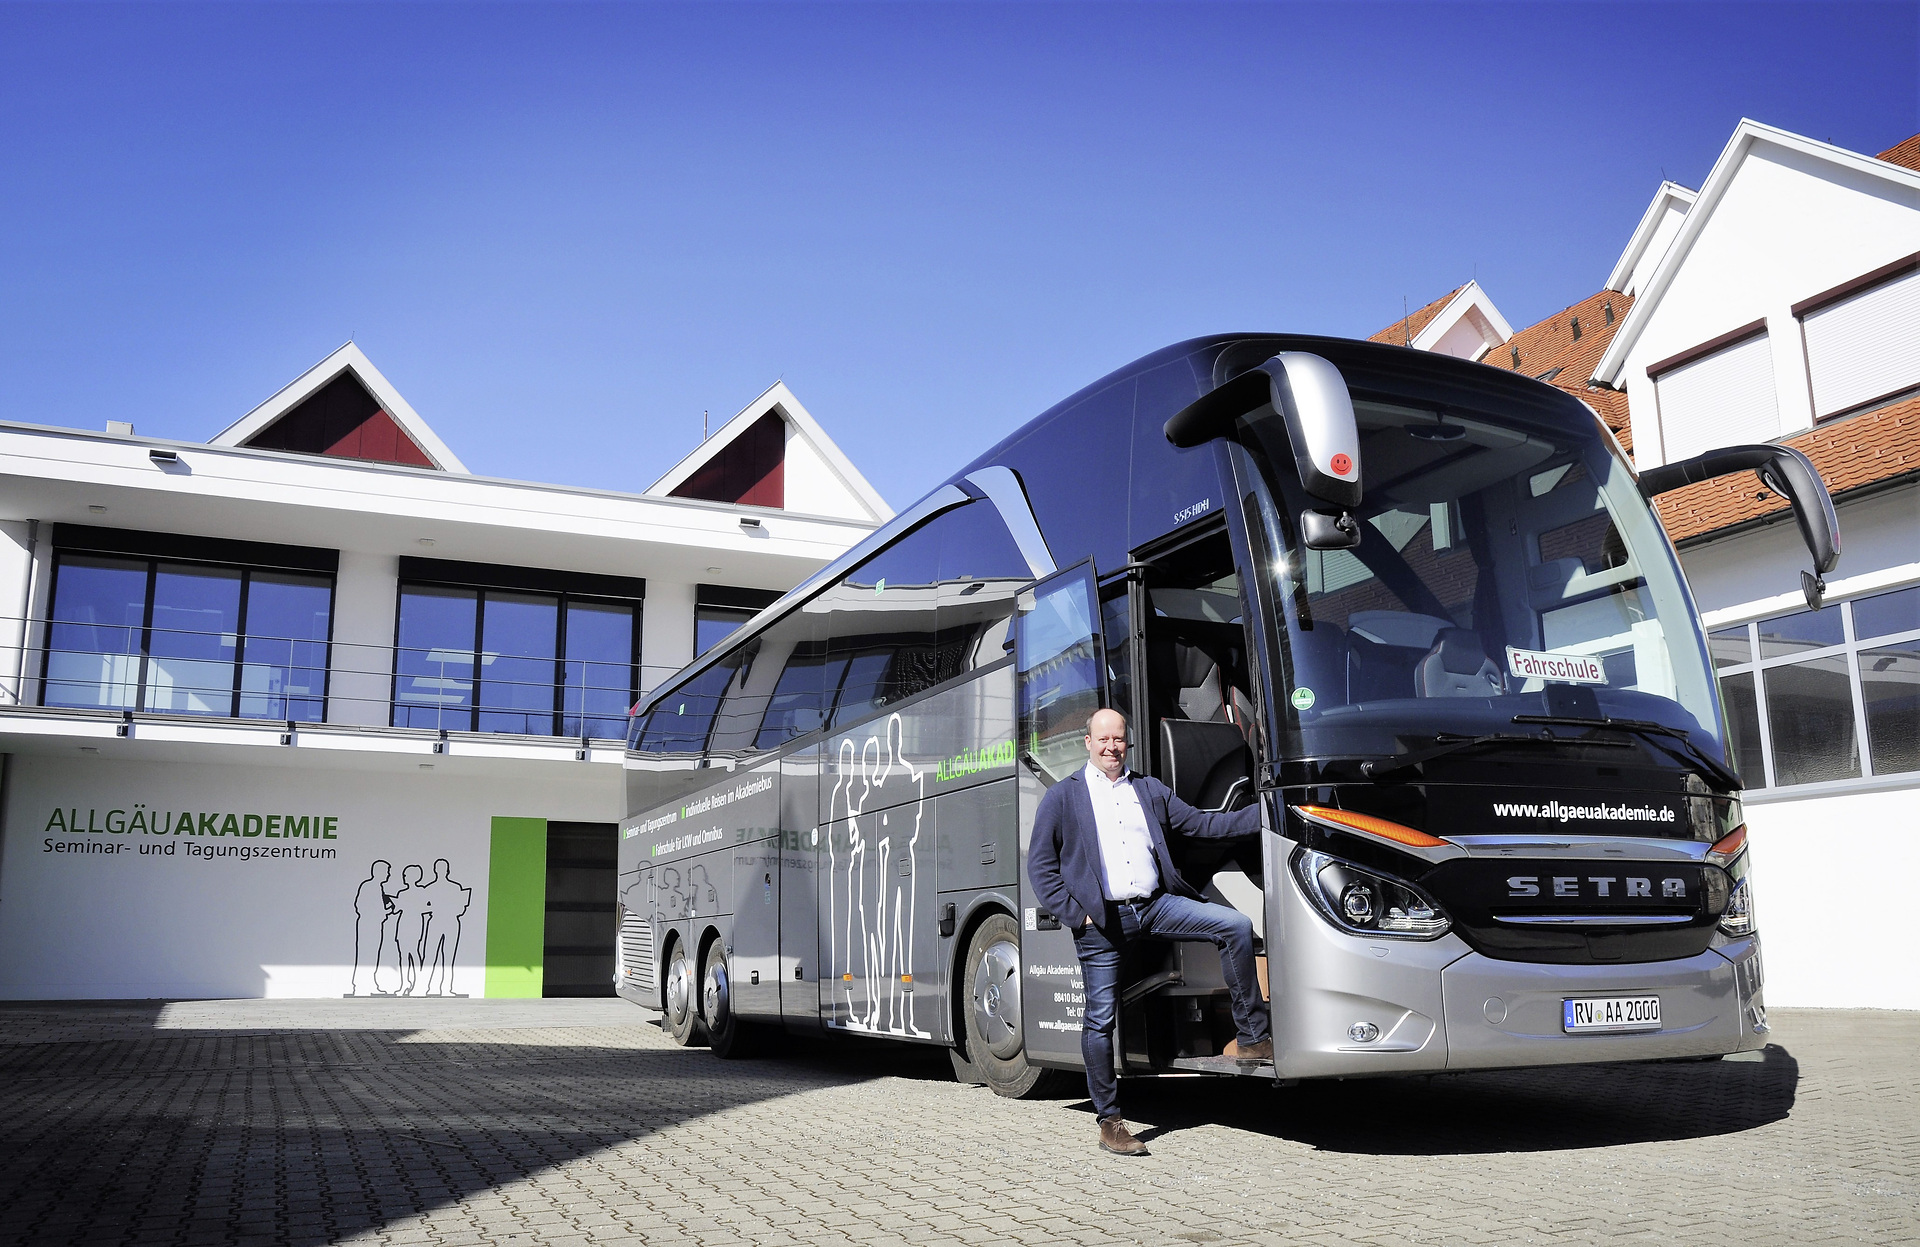 Setra – from the very beginning